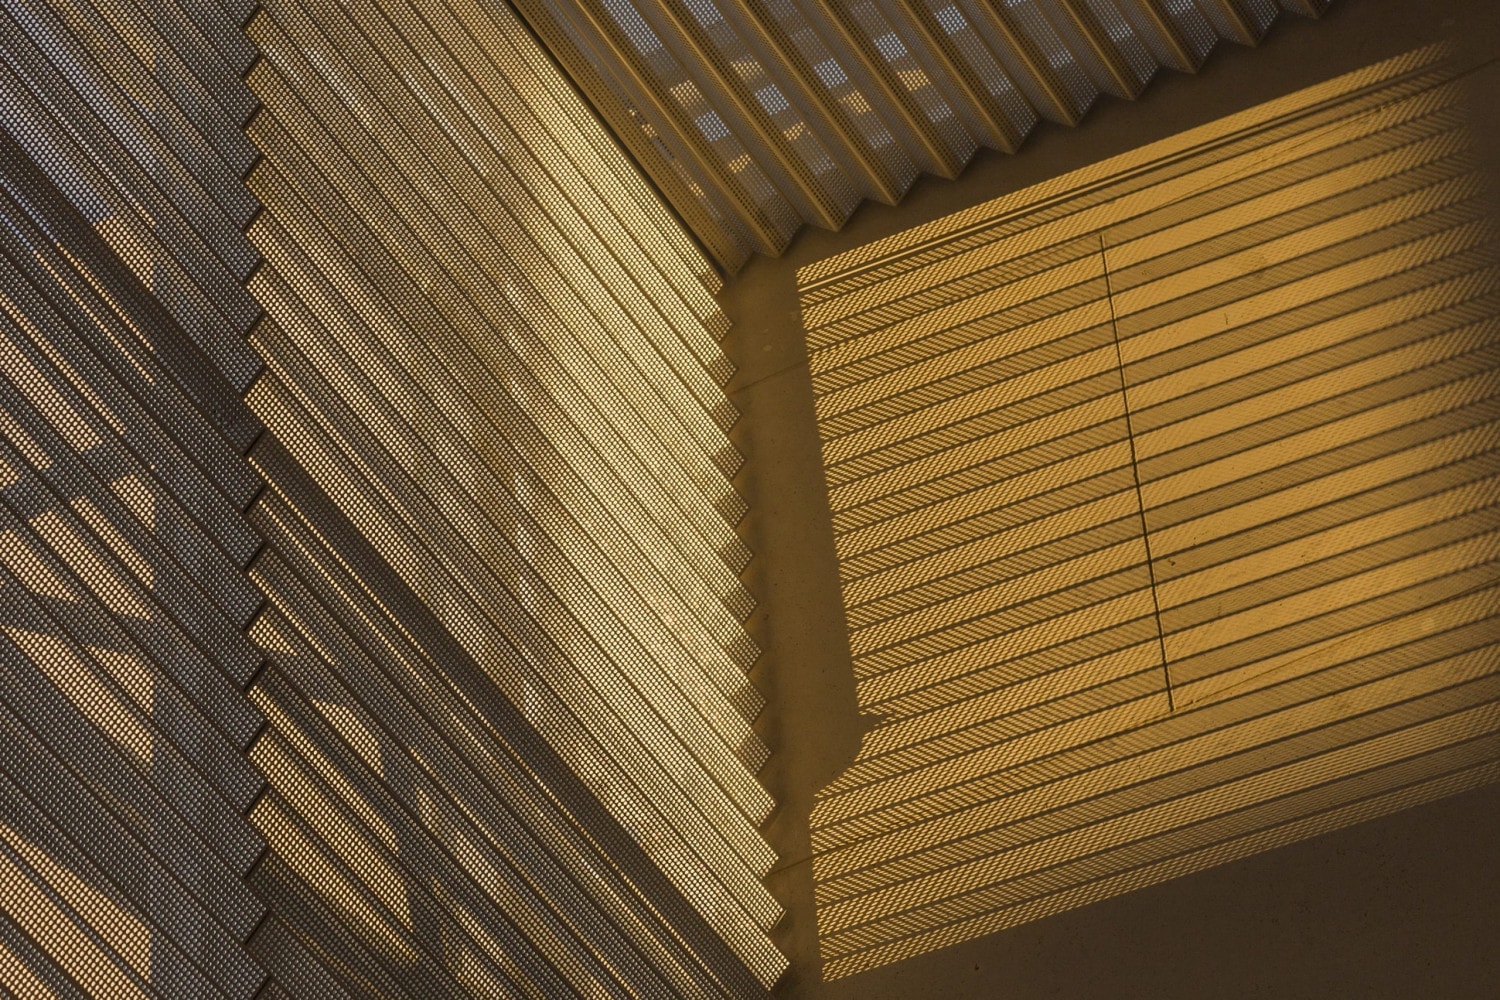 Detail of the argyle shadows cast by folded metal with perforations.